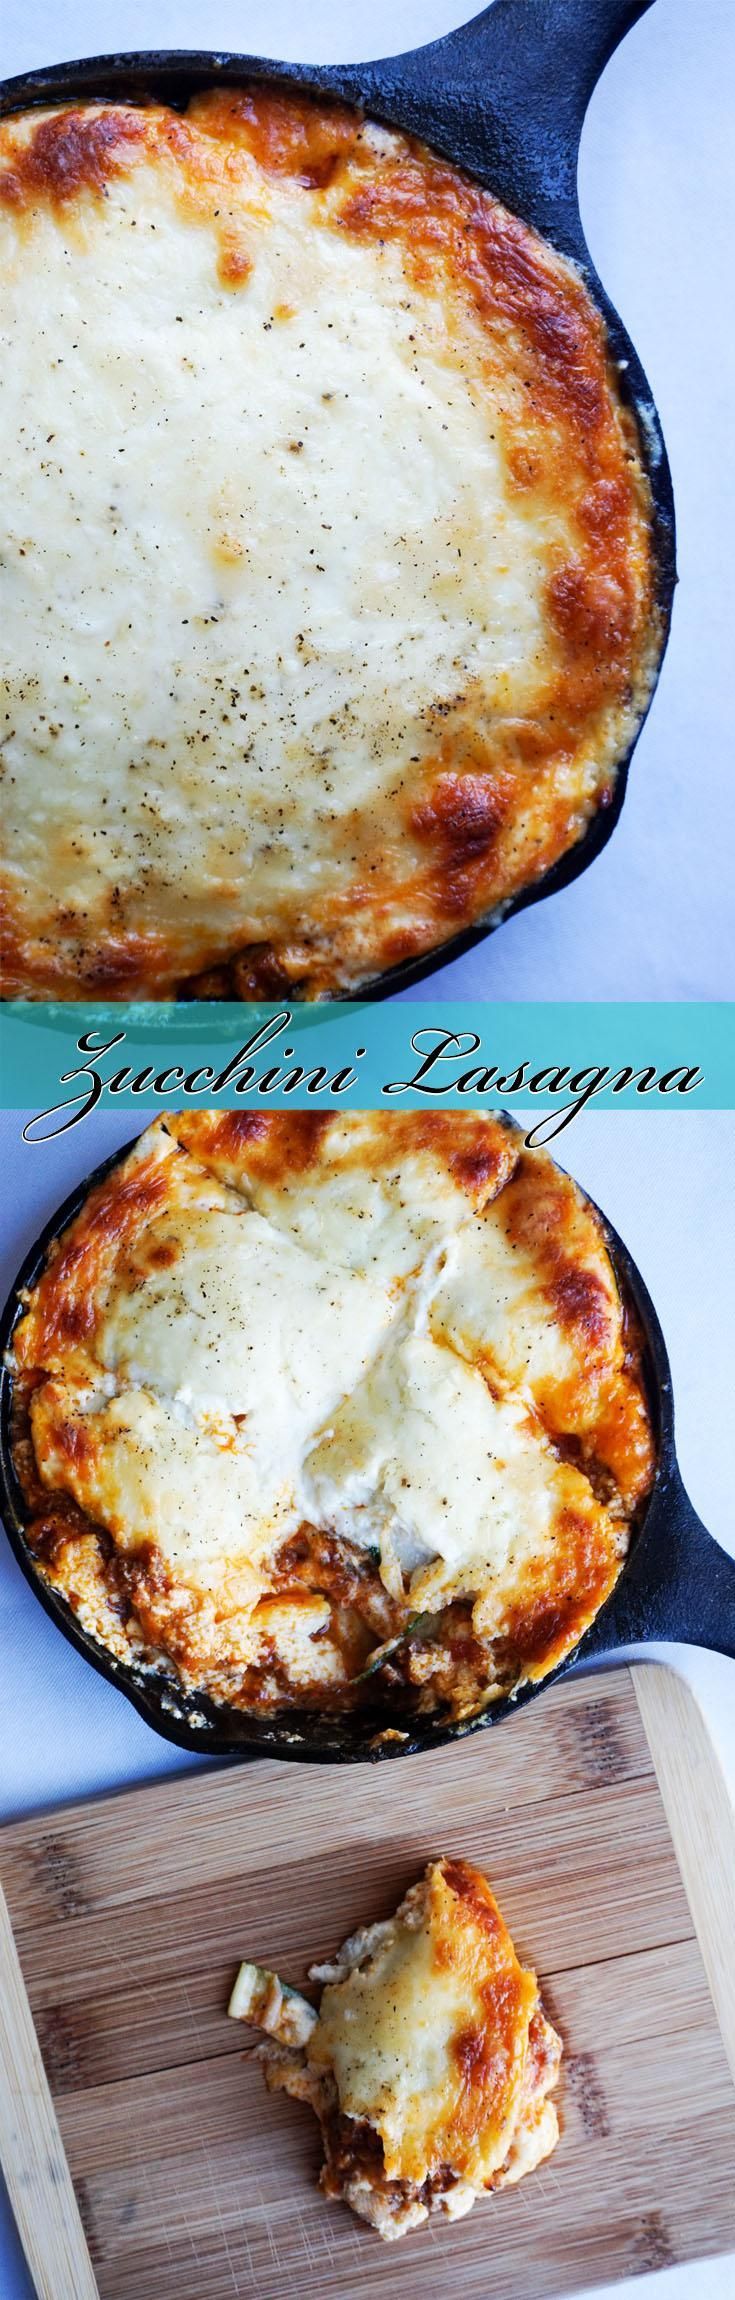 Keto lasagna made with thin sliced zucchini and loaded with meat and cheese!